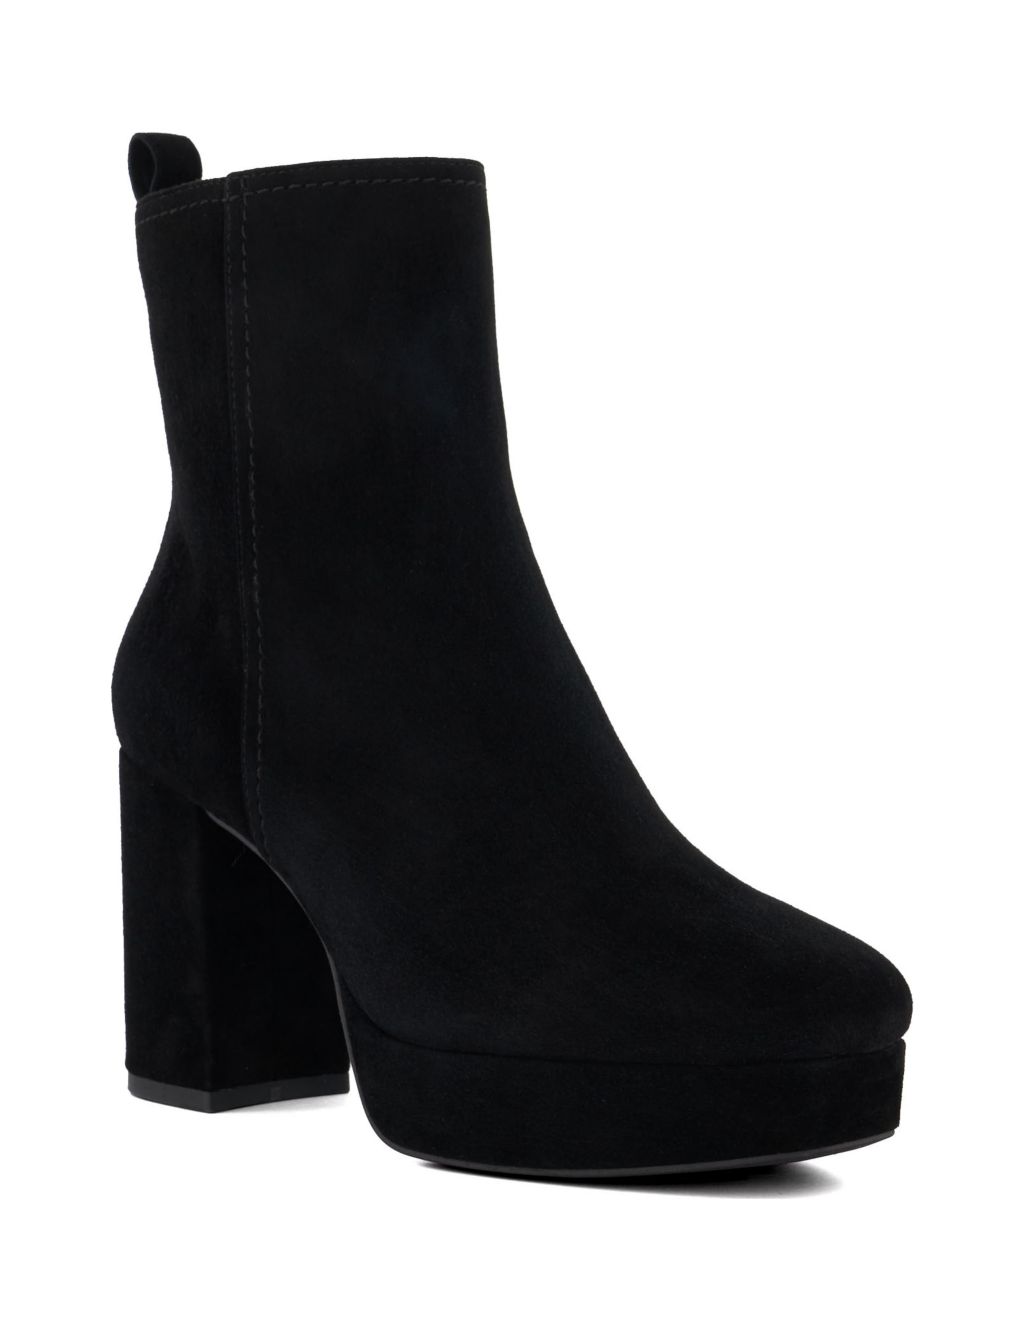 Suede Chunky Platform Ankle Boots image 2